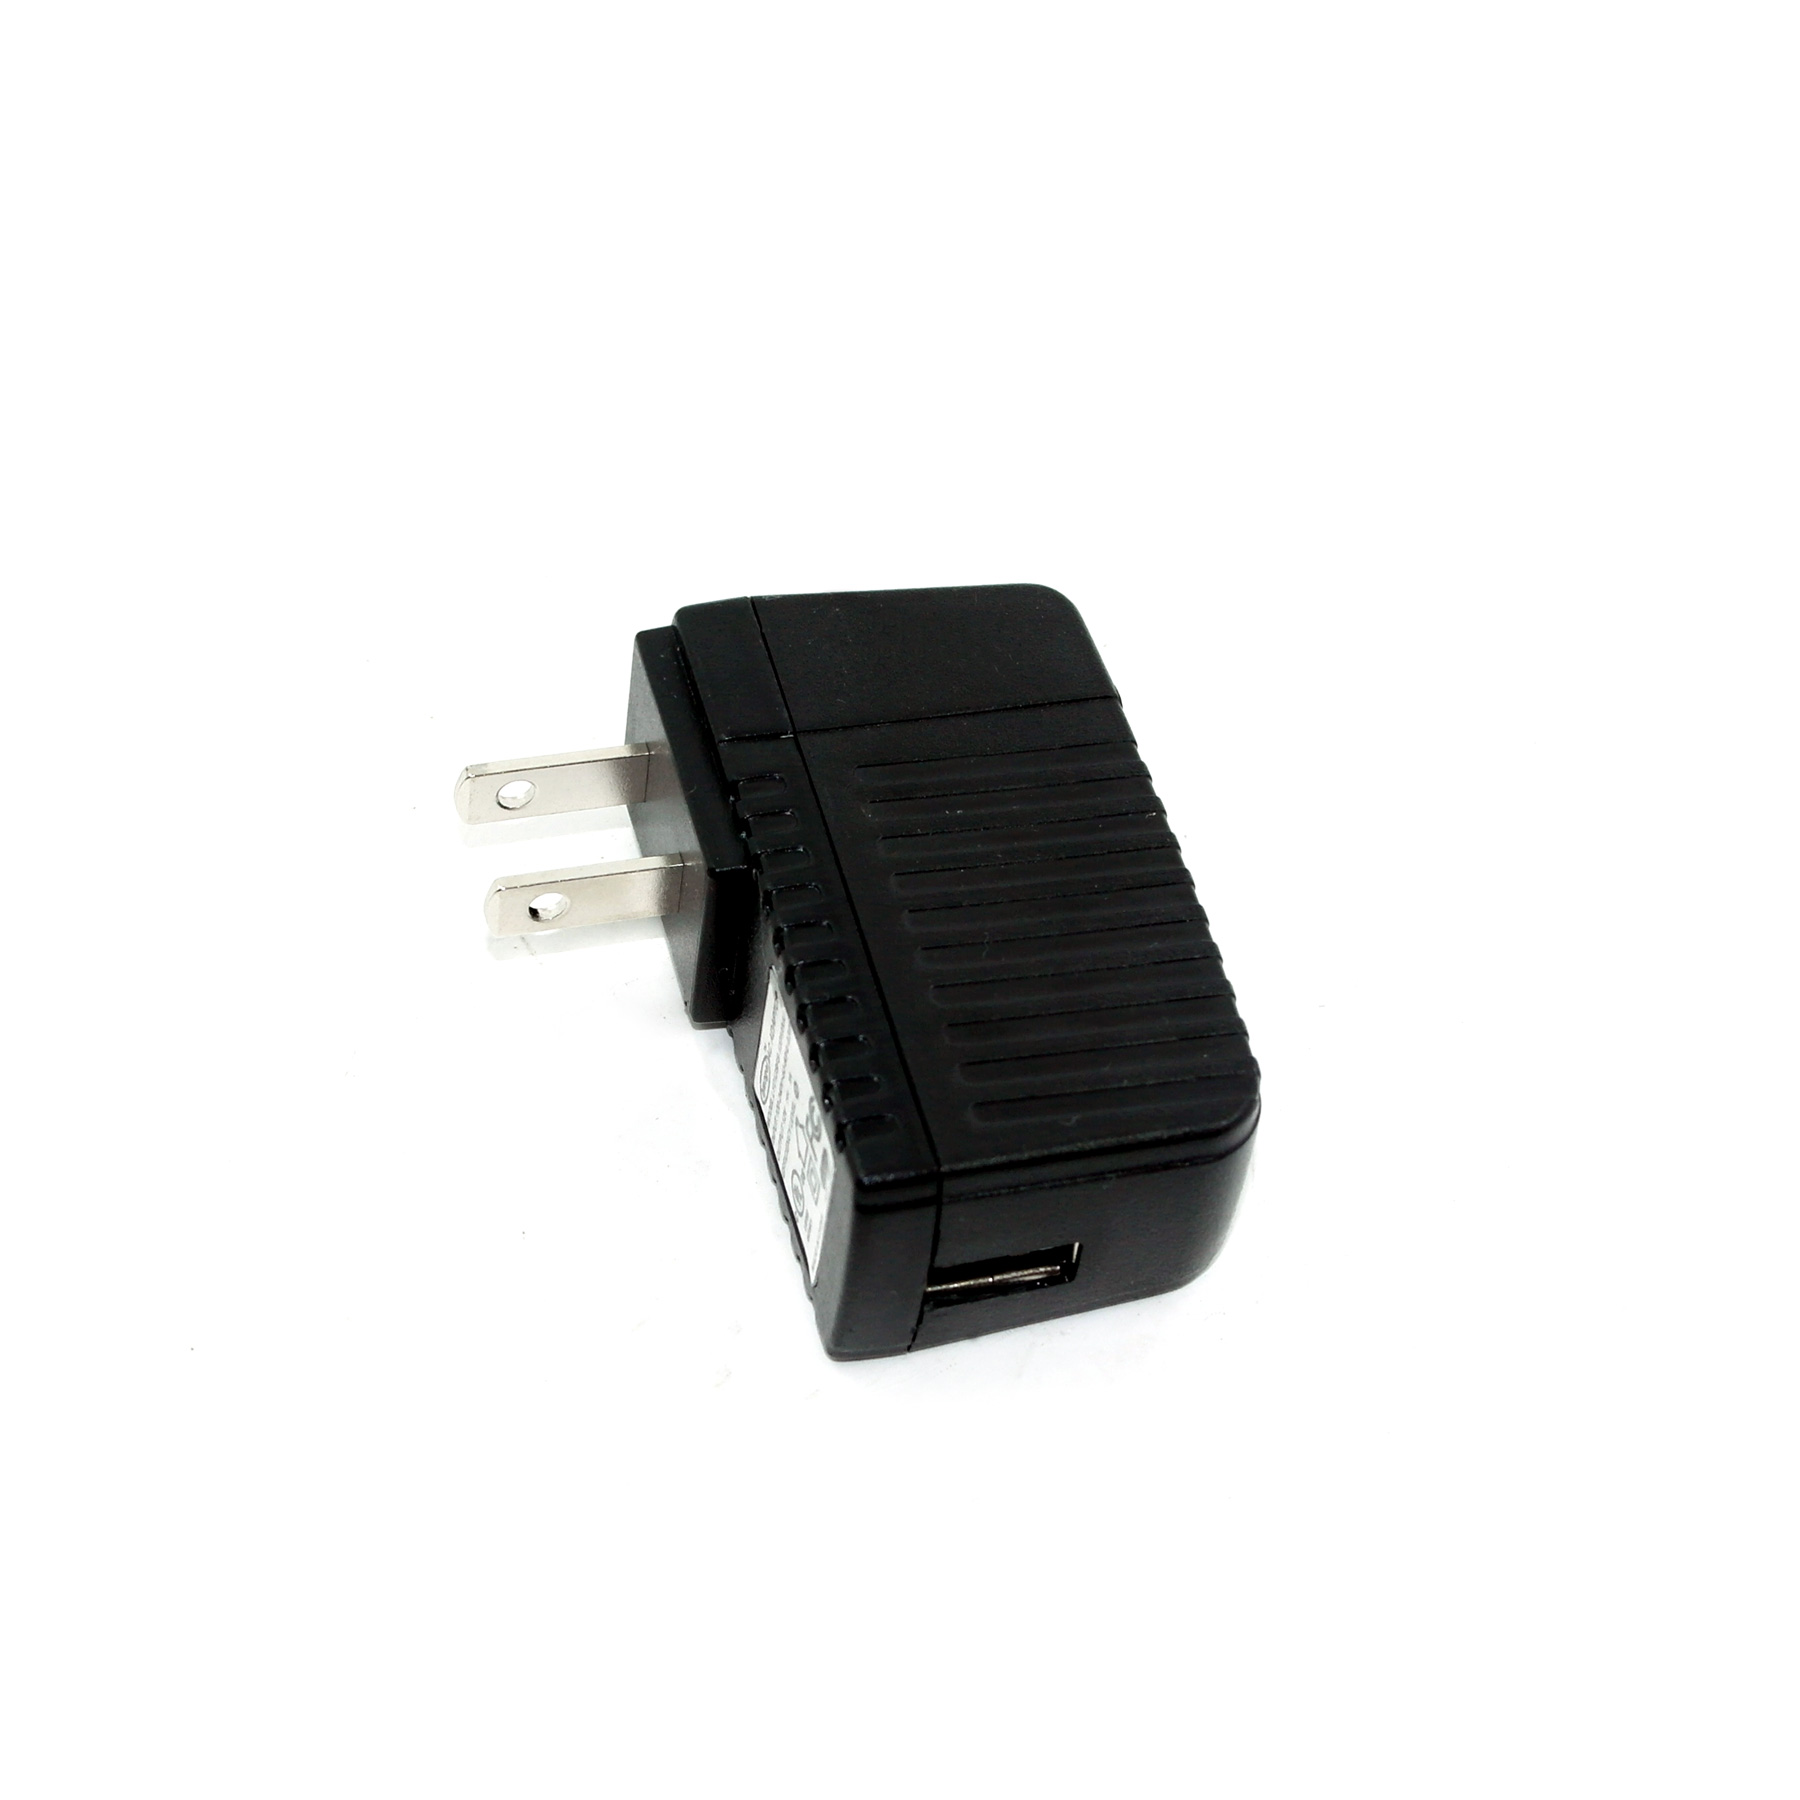 KRE-0502003,5V 2A 5W USB adaptor, 5V 2A switching adapter